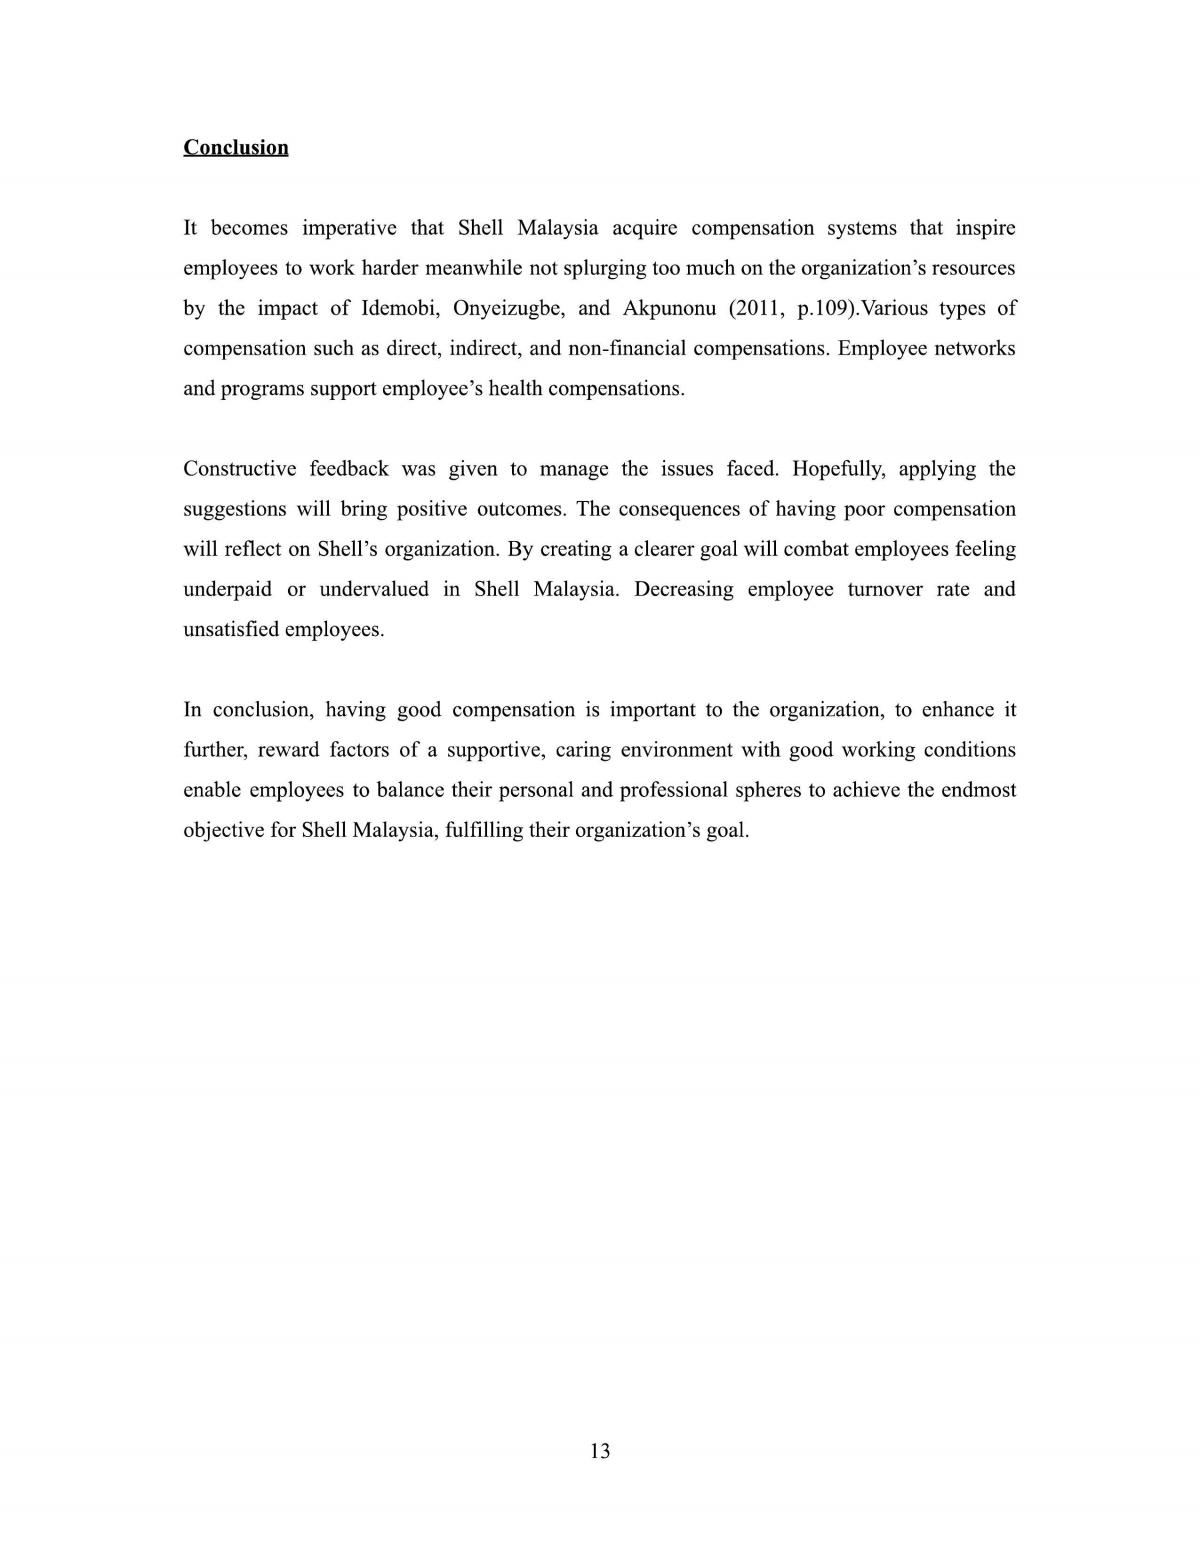 The essay of human resource management  - Page 13